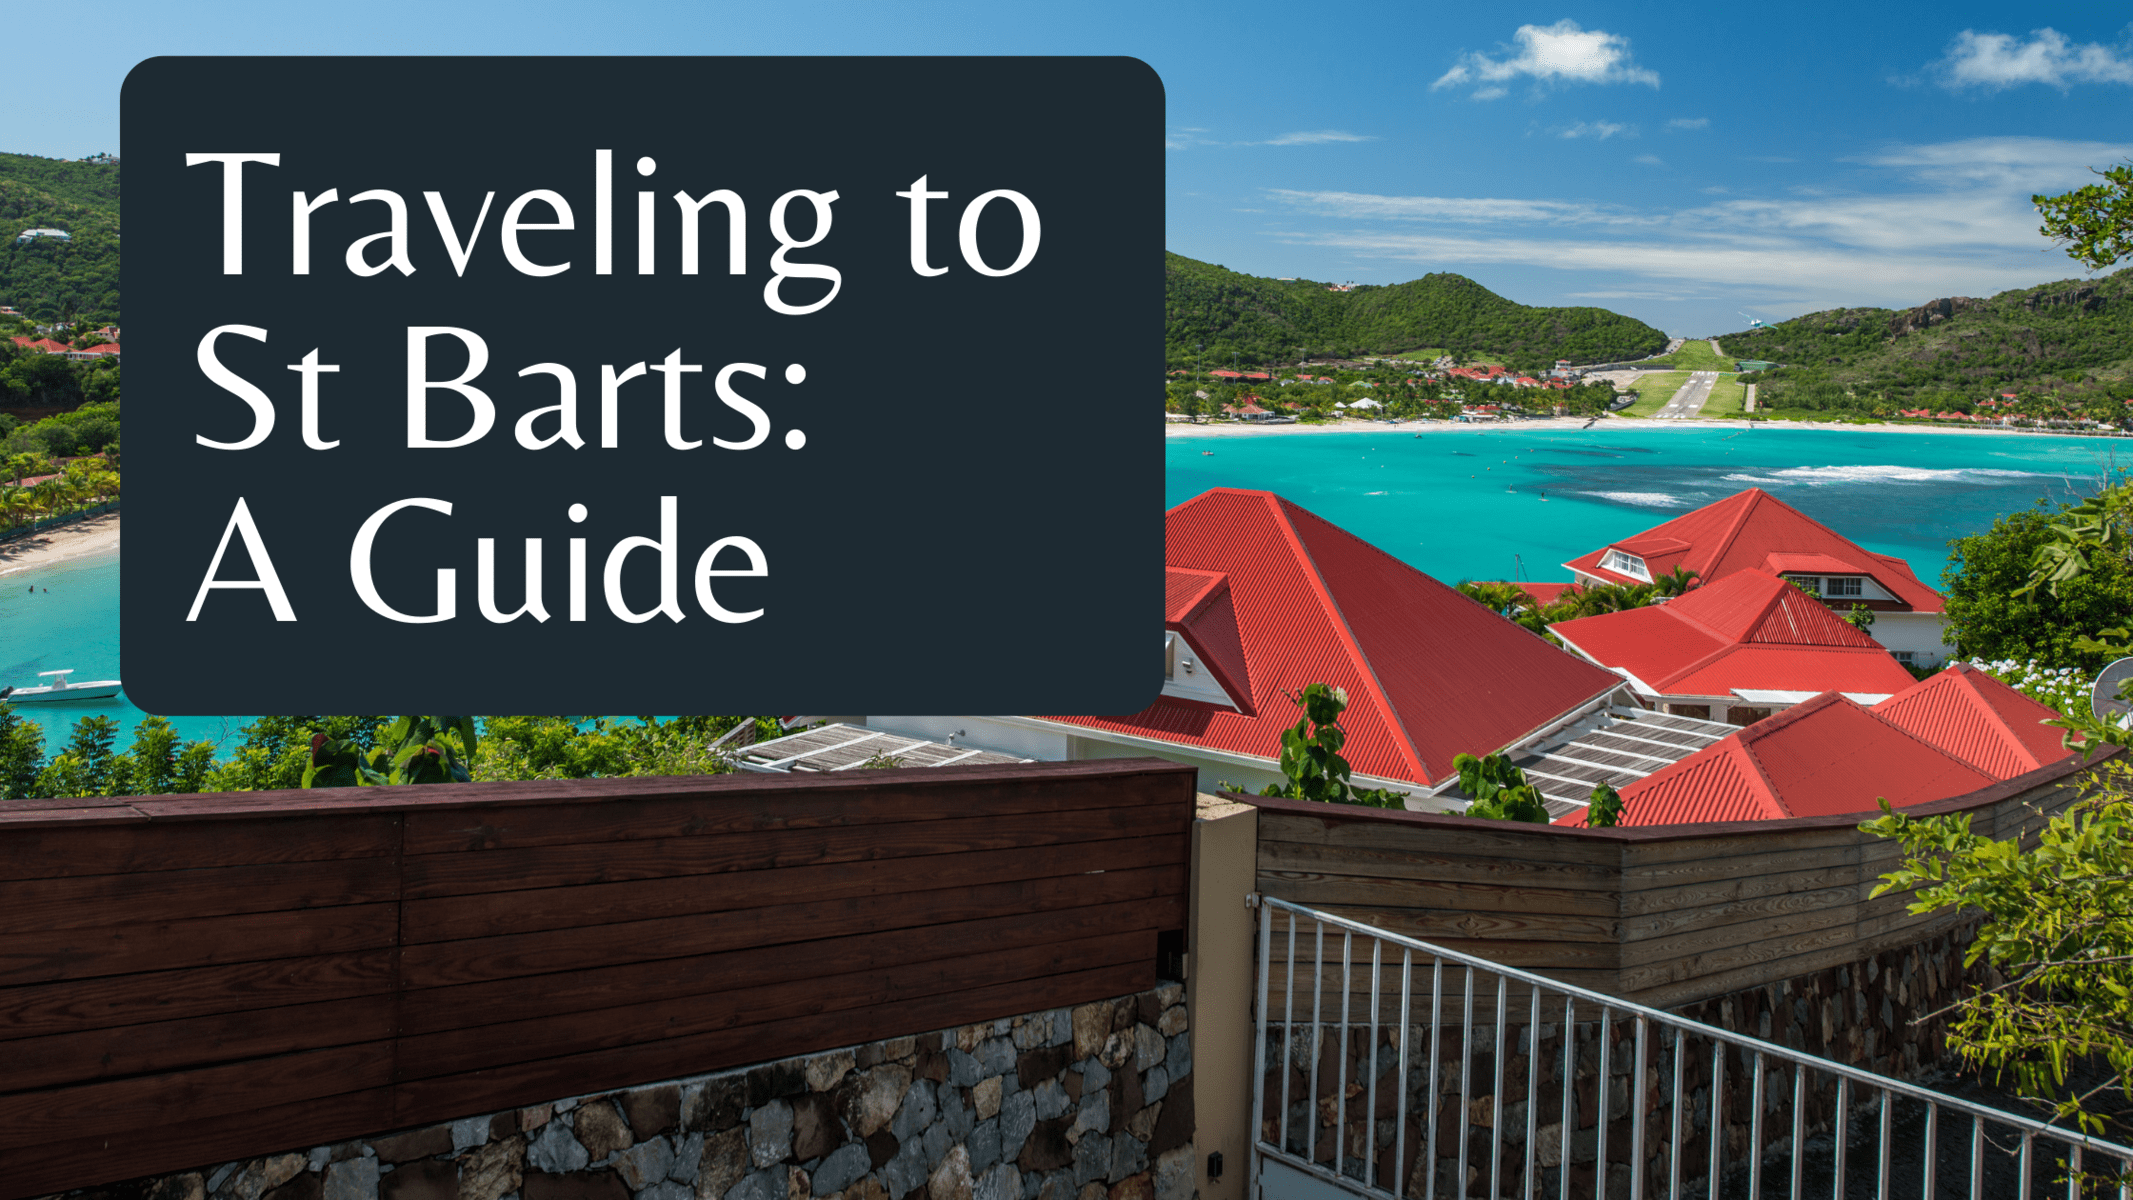 Shopping in St Barts - Travel Guides and News